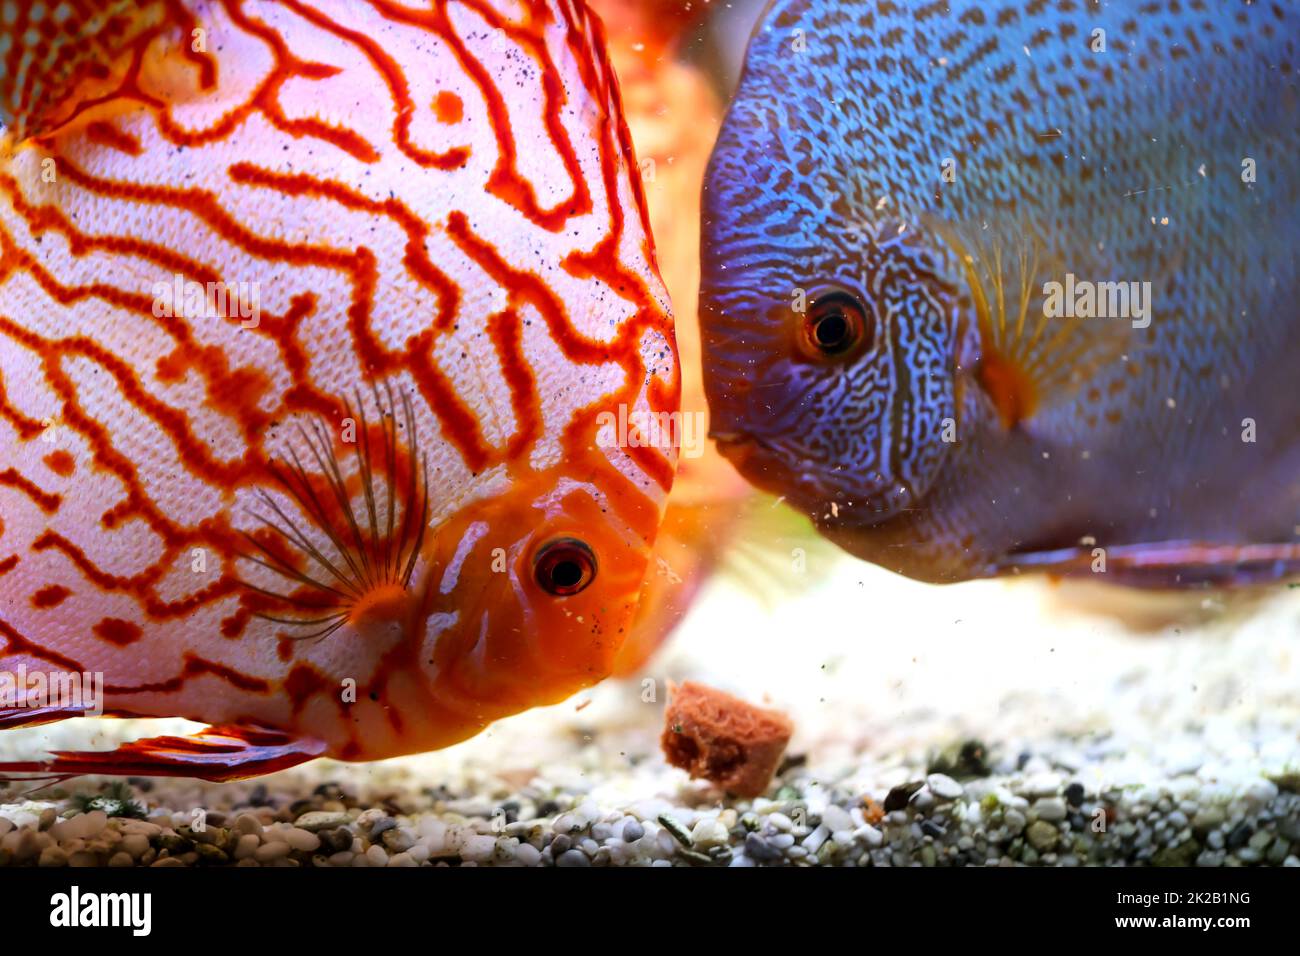 Discus fish, discus cichlids at feeding time. They bite off the food and partially blow it back into the water. Stock Photo